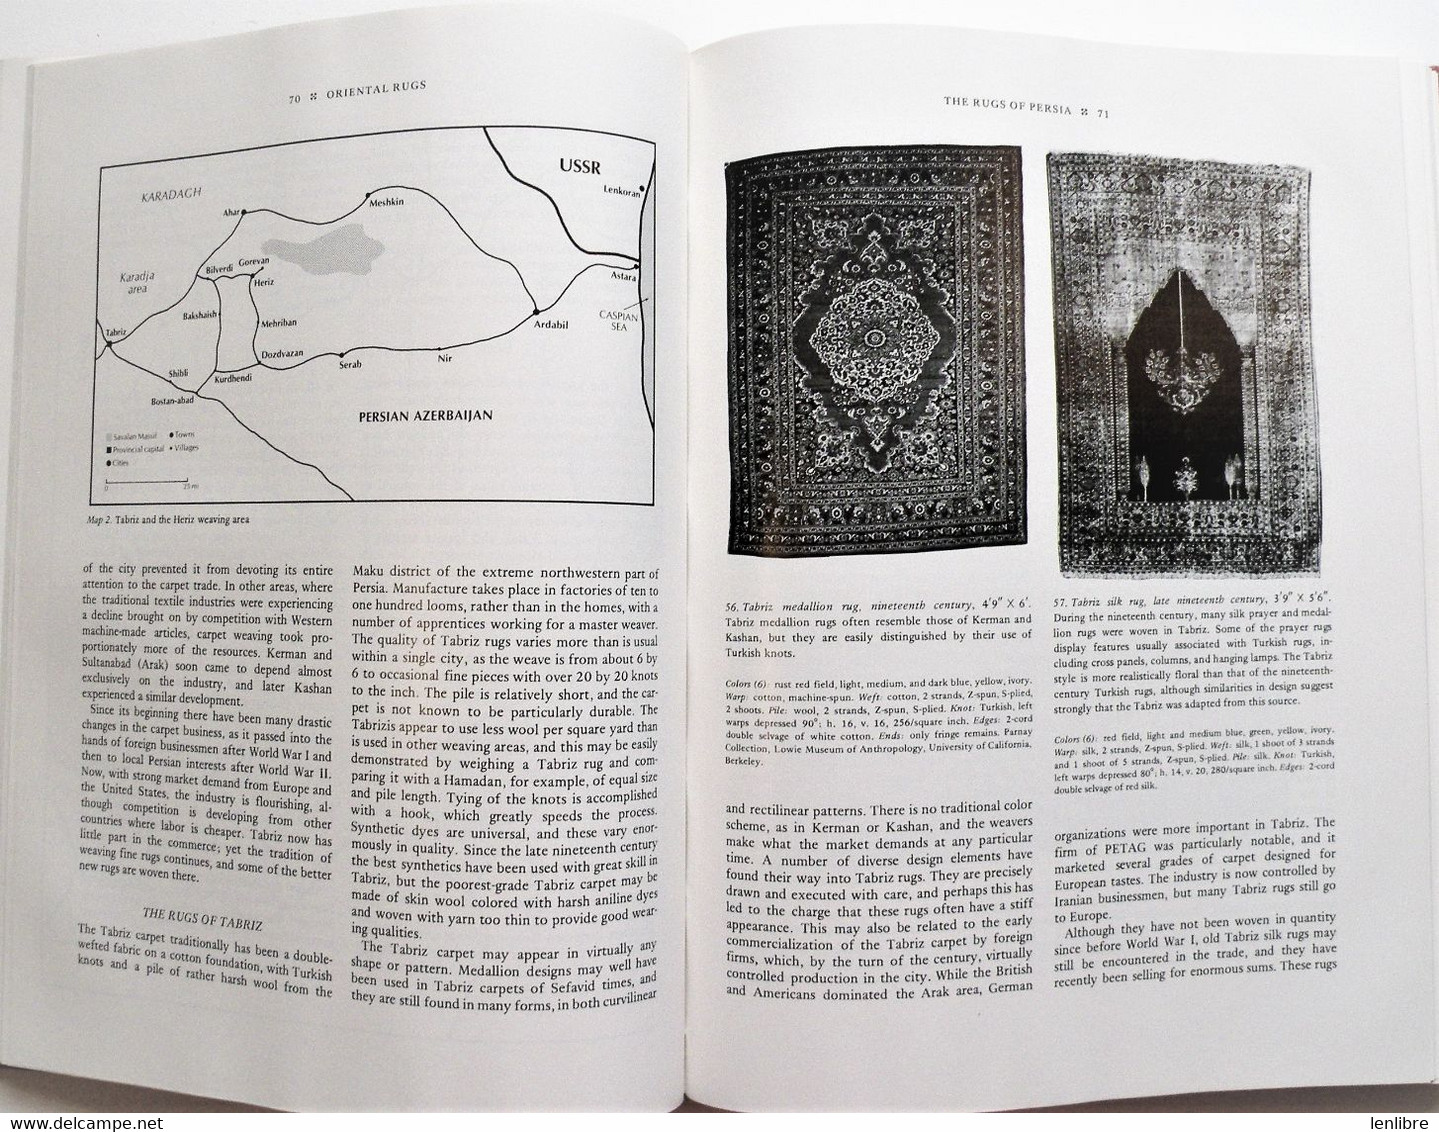 ORIENTAL RUGS. A New Comprehensive Guide. Murray L.Eiland. Brown And Co.1981. - Culture